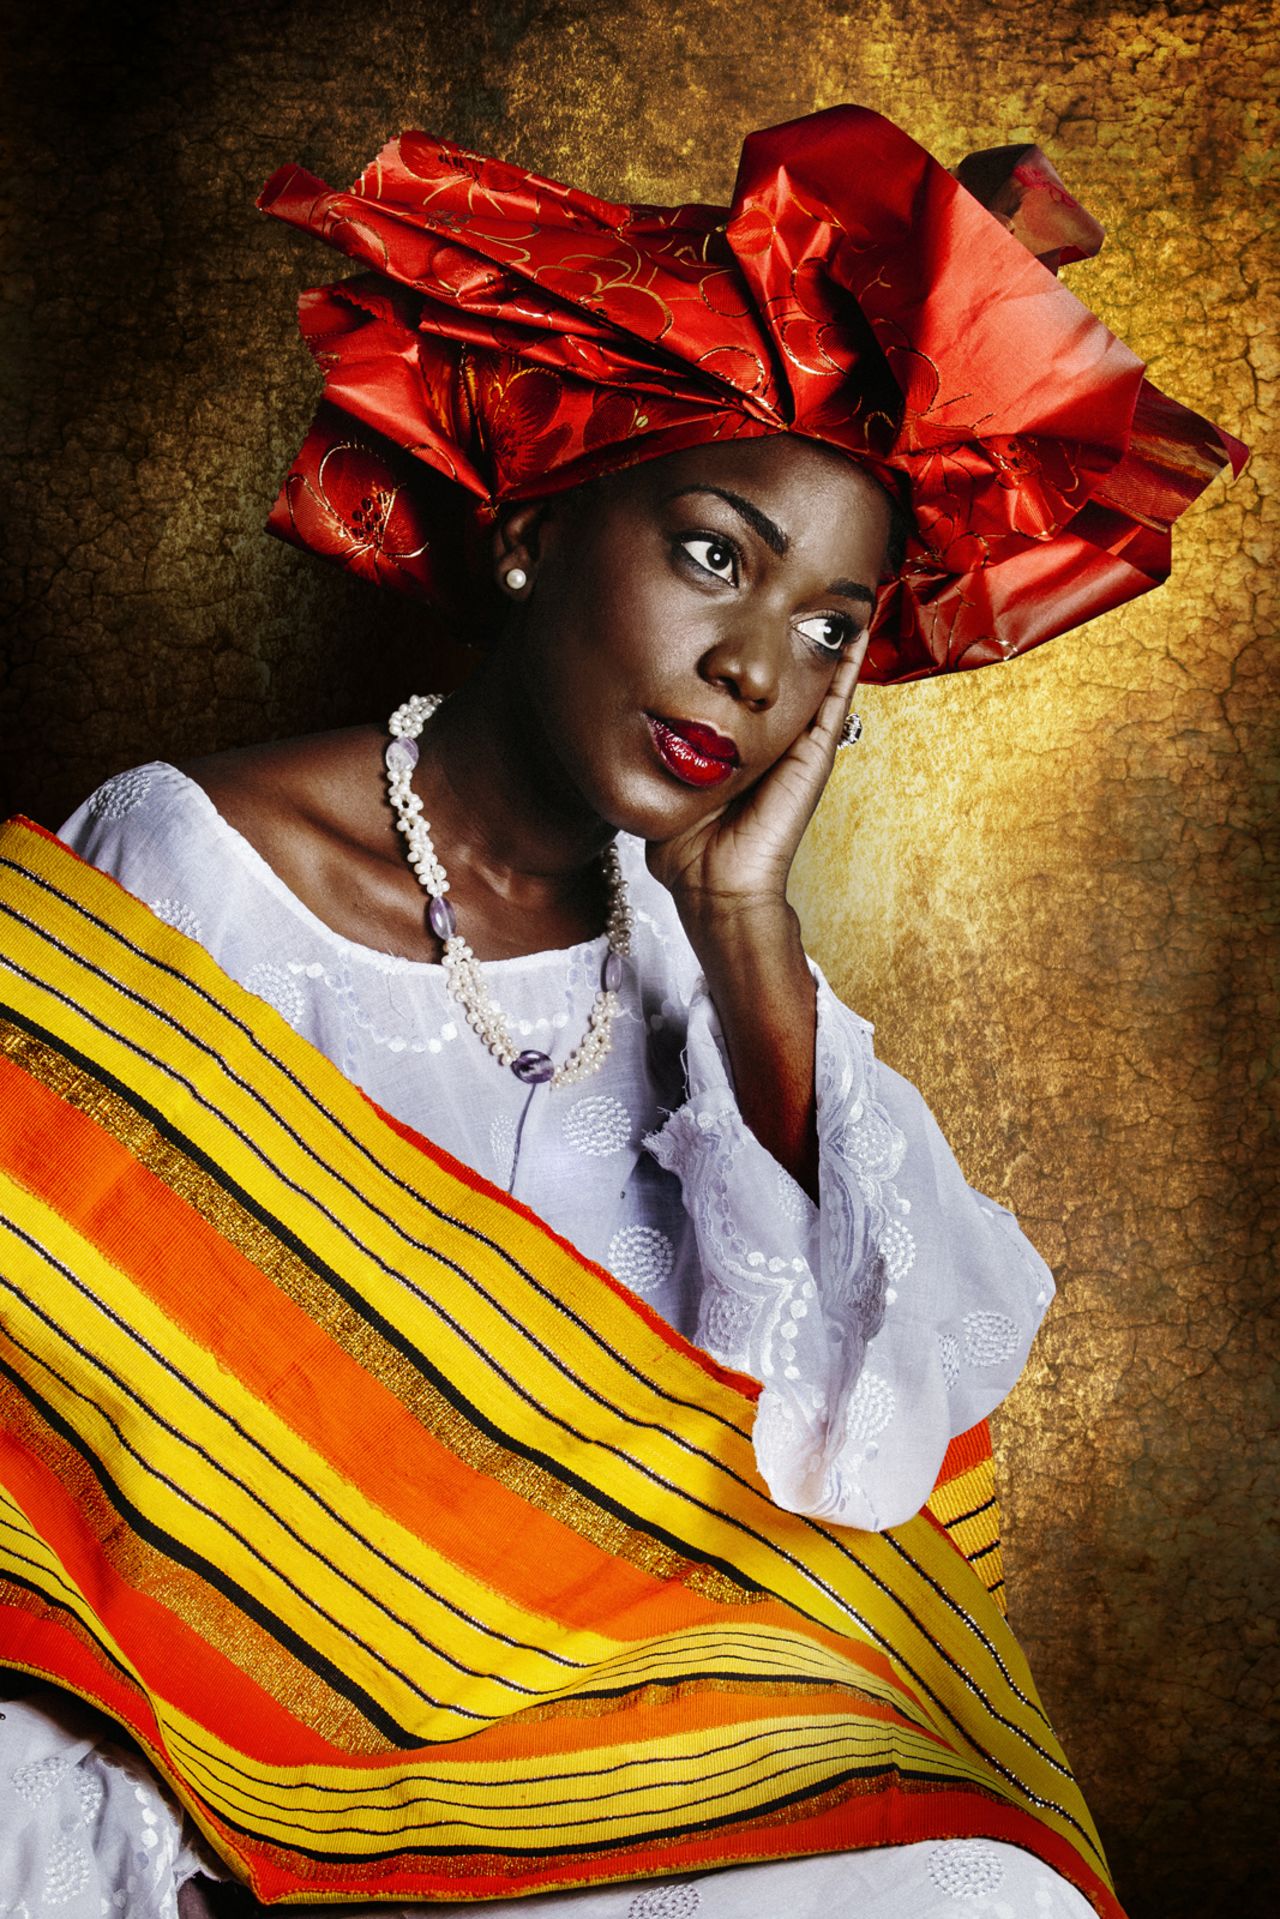 Amari Anifah, a Yoruba woman, is photographed as part of Choumali's 'Resilients' series. <a href="https://edition.cnn.com/style/gallery/joana-choumali-resilients-photography/index.html" target="_blank">Read</a> more about <a href="https://edition.cnn.com/style/article/joana-choumali-resilients-photography/index.html" target="_blank">'Resilients.'</a>